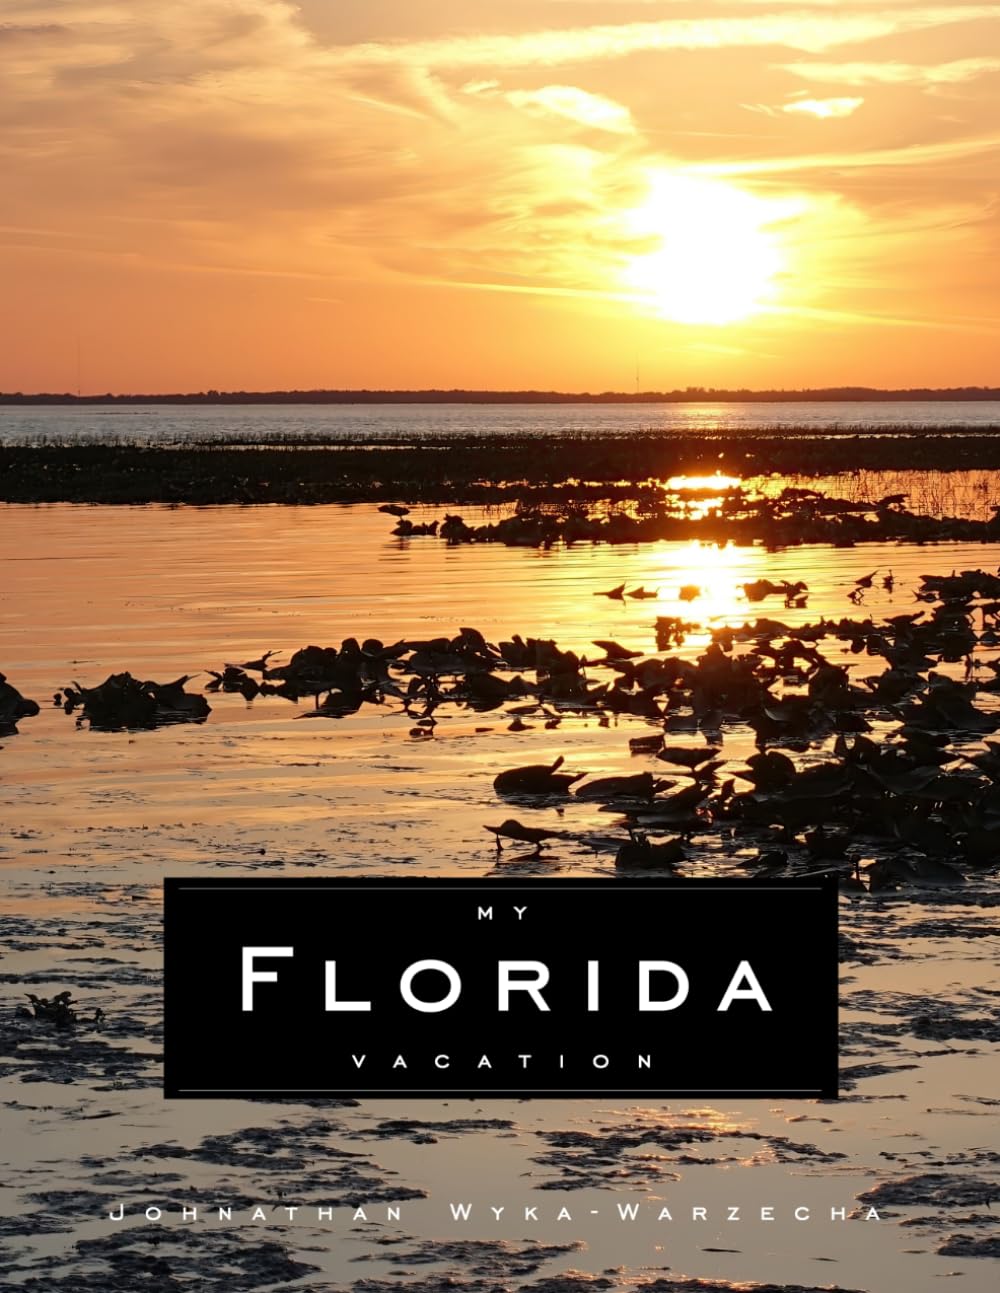 My Florida Vacation: Beautiful Landscape Travel Photography Coffee Table Picture Book | Full Color Page Beach, Nature, Everglades, and Resort Photographic Images (Coffee Table Book Series)